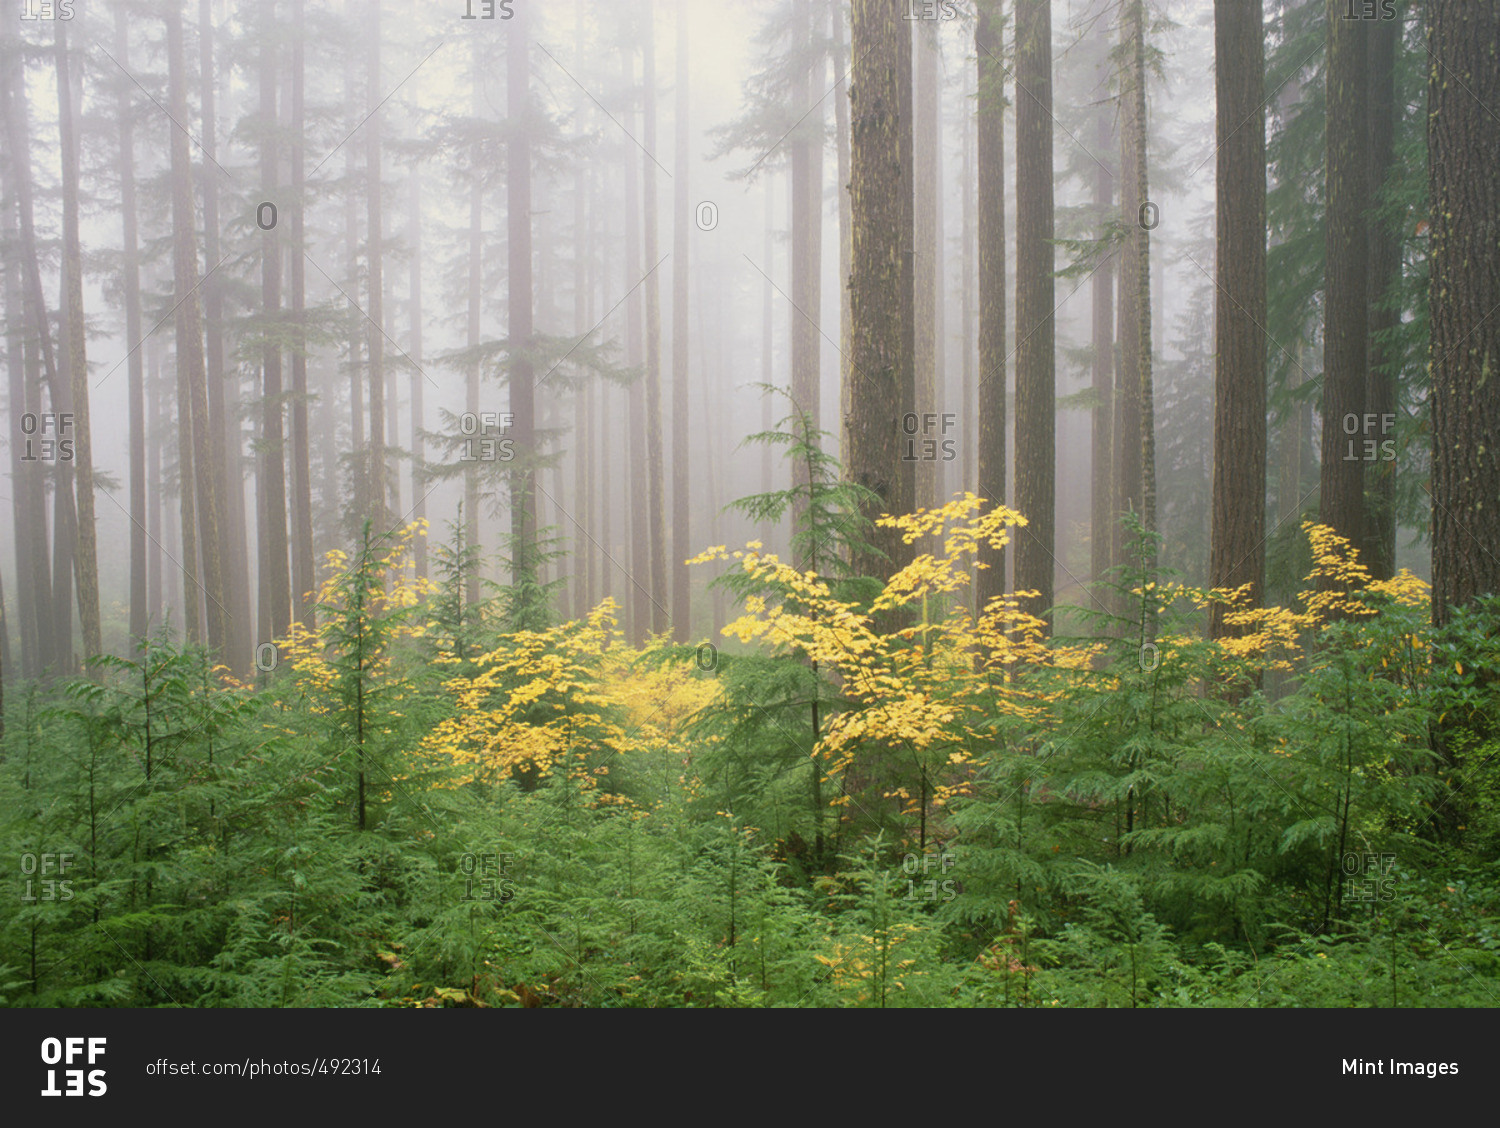 Hemlock and vine maple trees in the Umpqua National Forest. Green and yellow foliage.